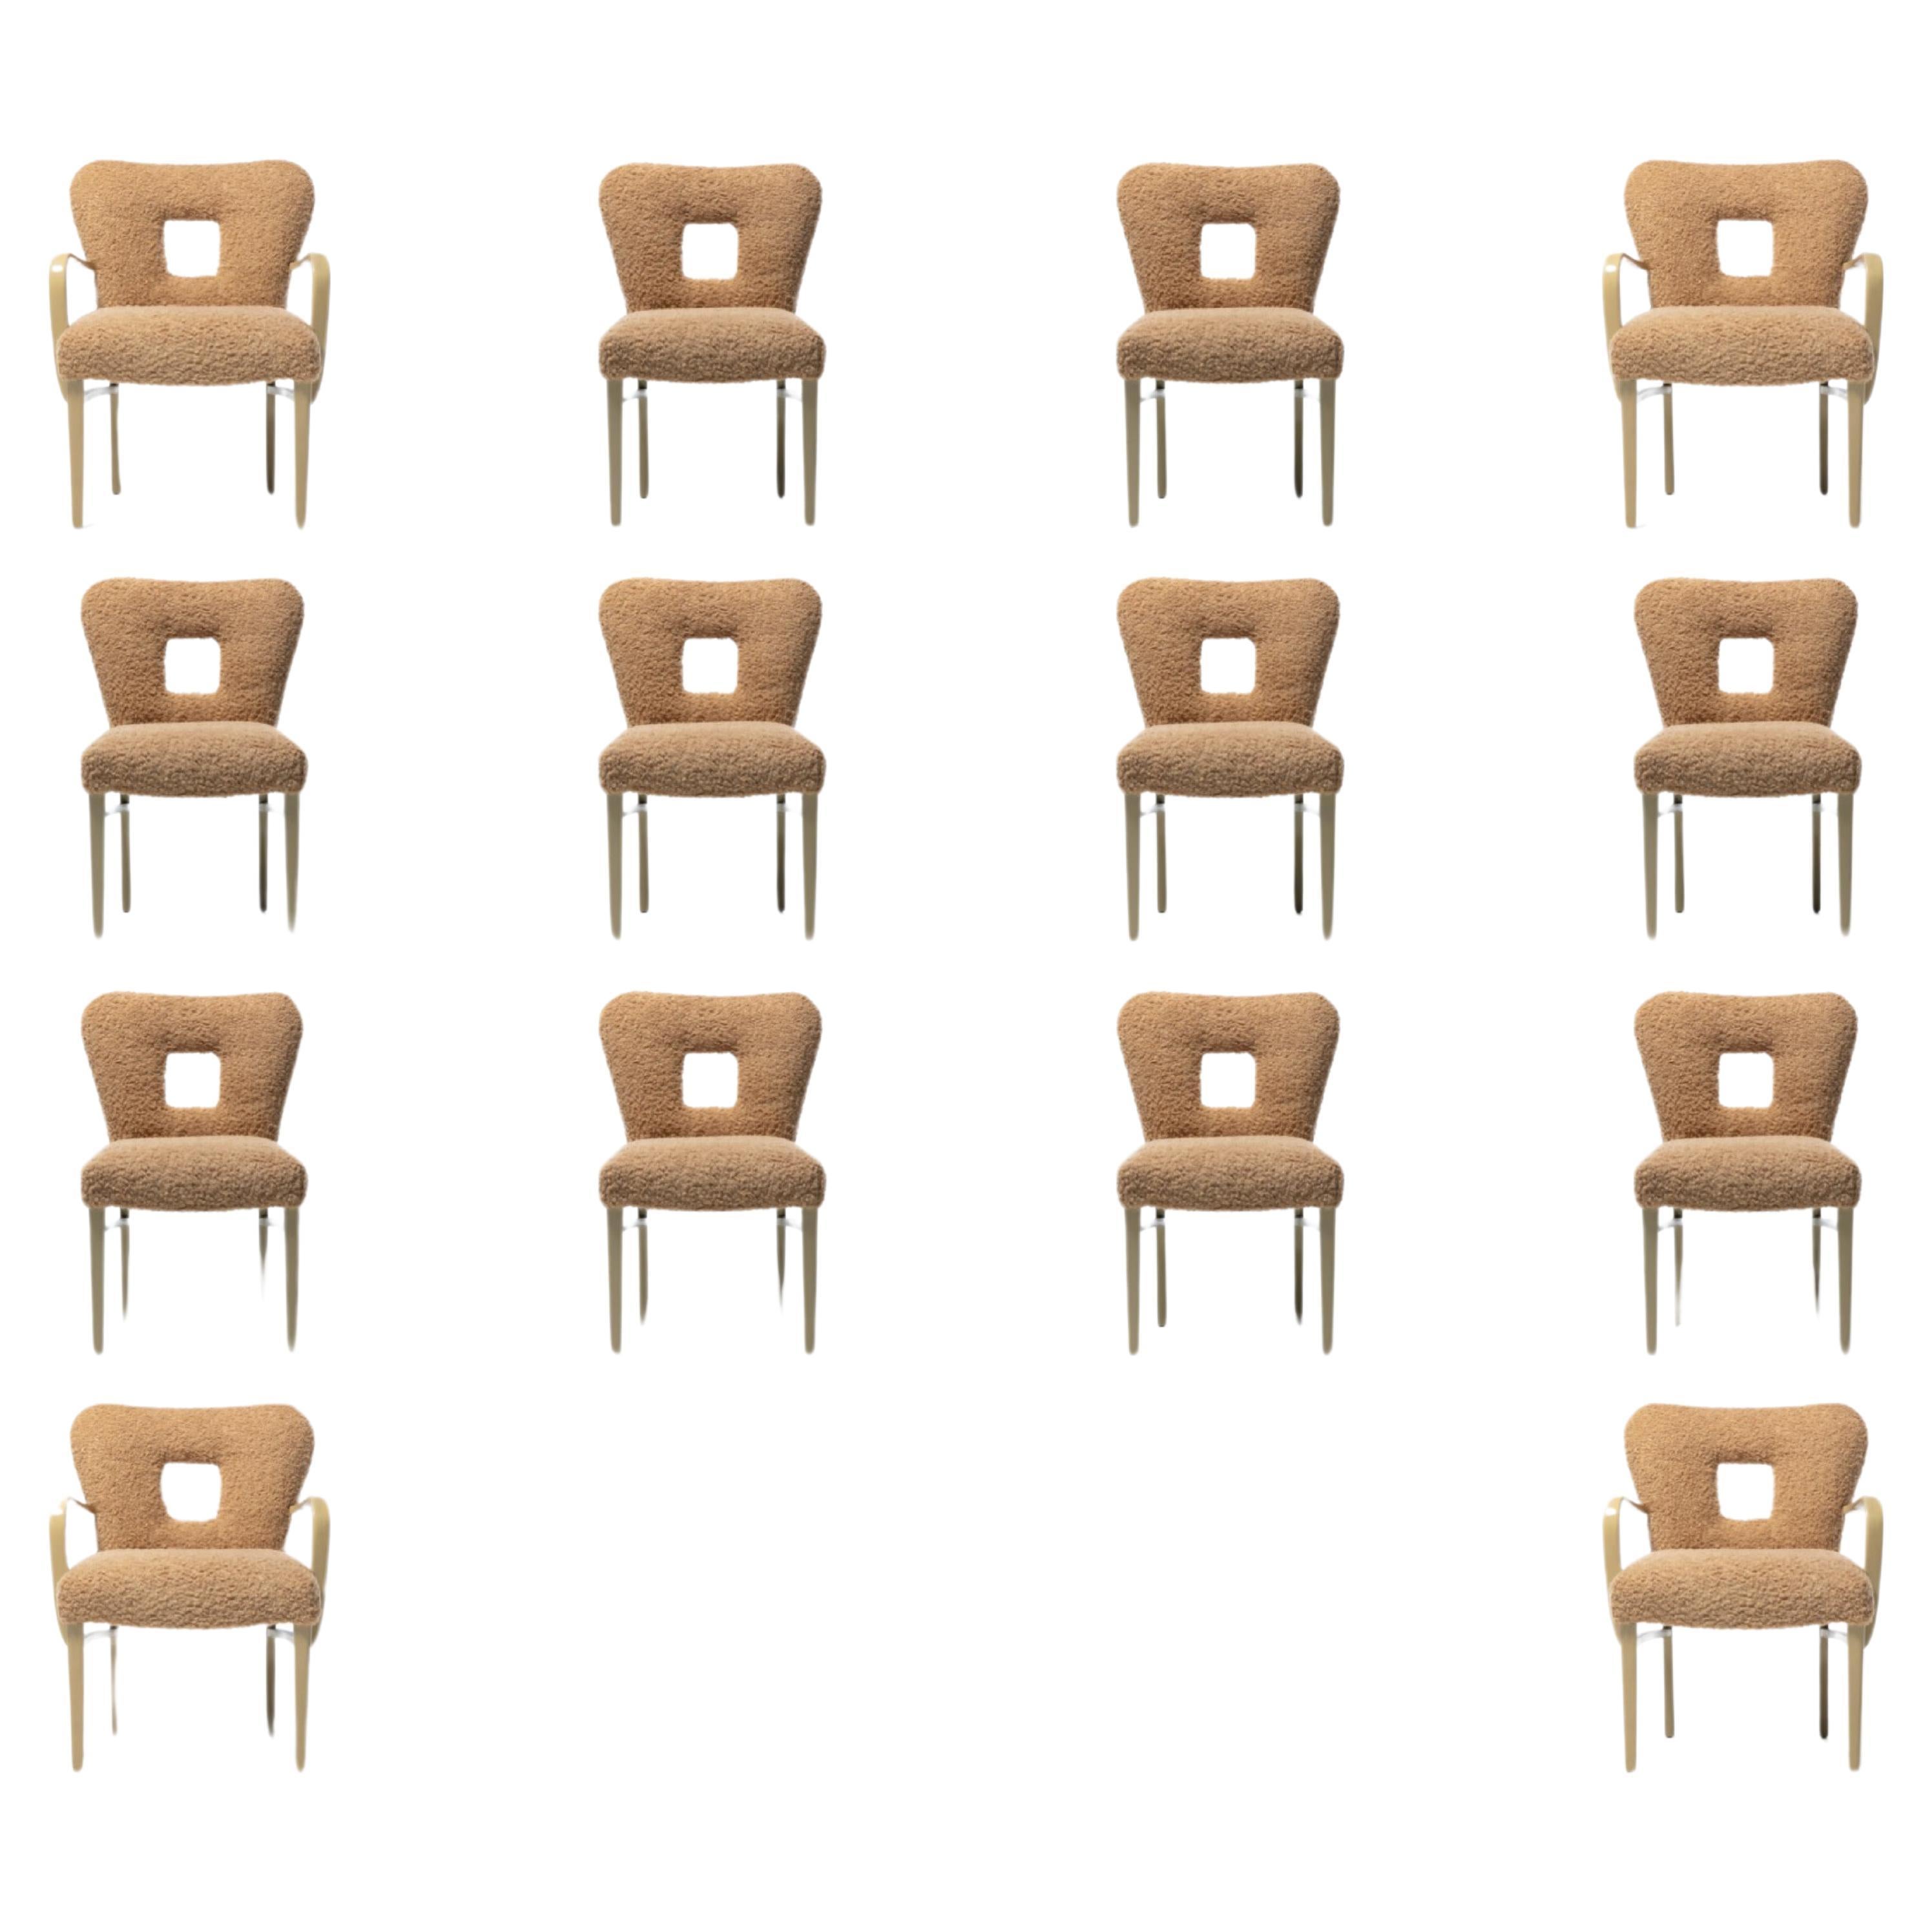 Paul Frankl Set of 14 Dining Chairs in Bleached Mahogany & Latte Bouclé c. 1950